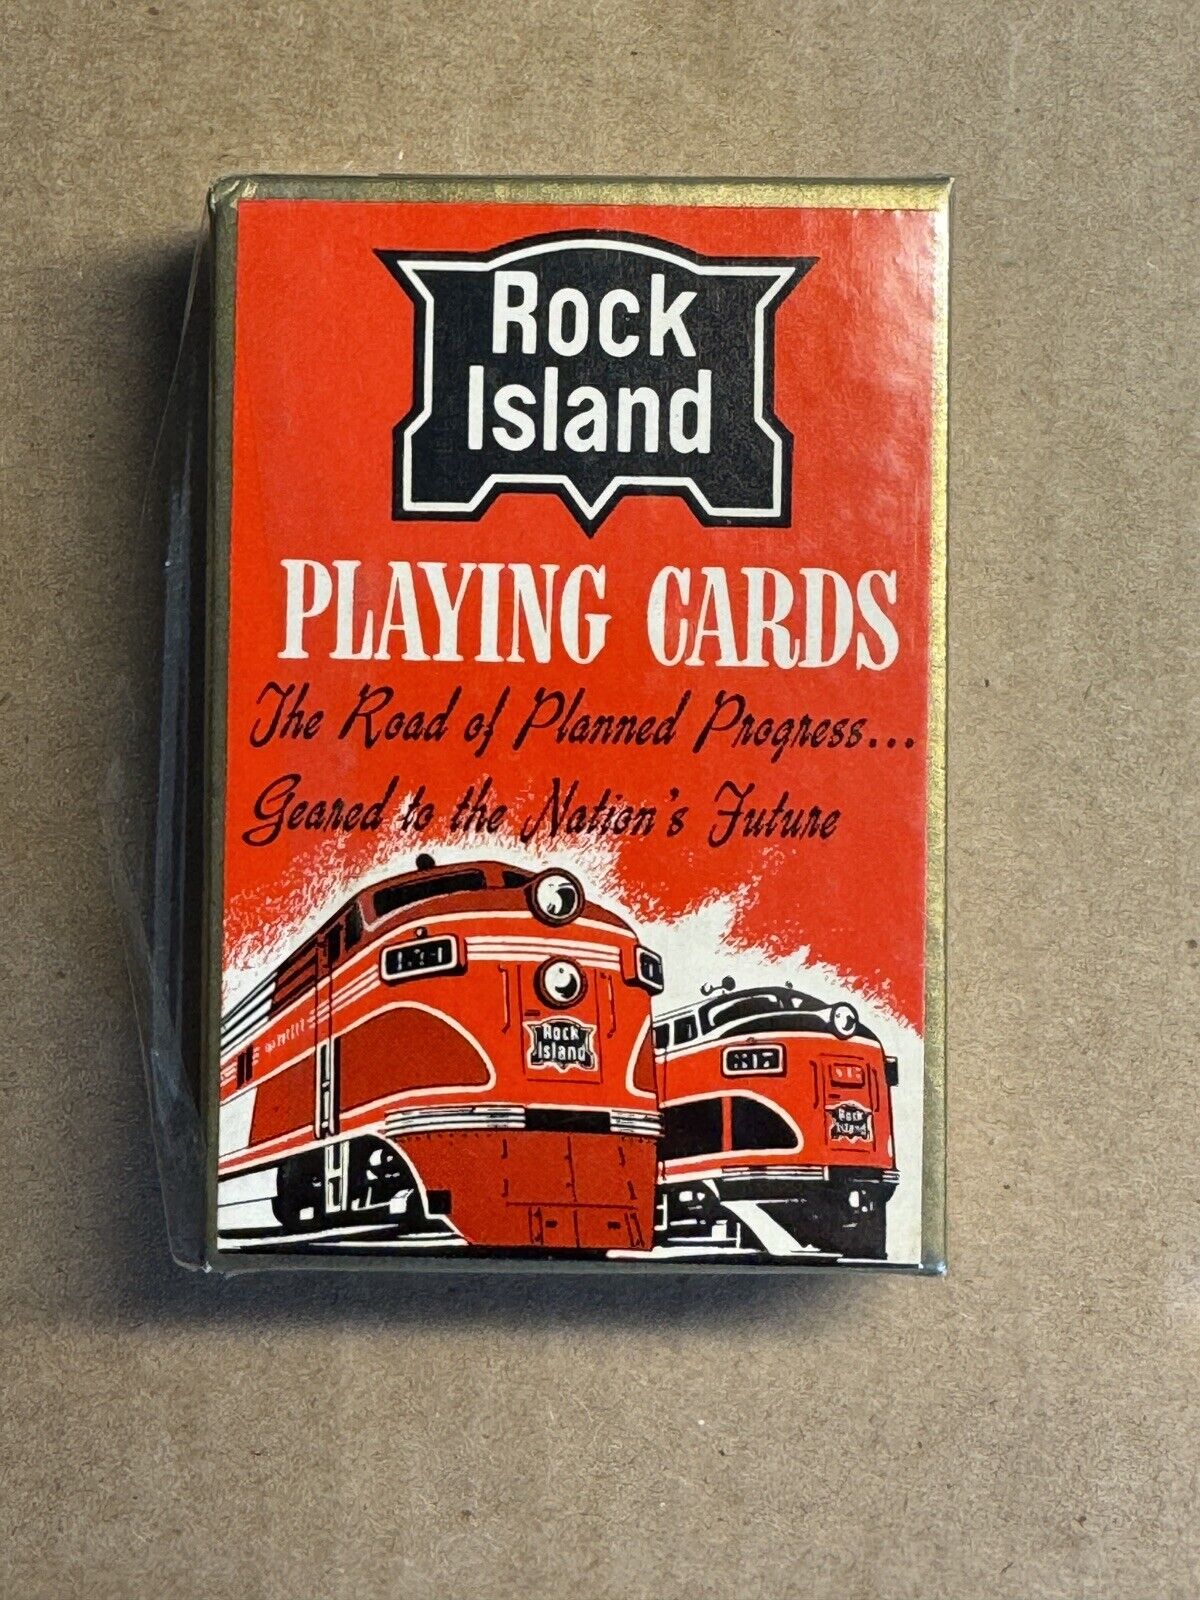 RARE Sealed In Box Vtg/Antique Chicago Rock Island Railroad Playing Cards Trains